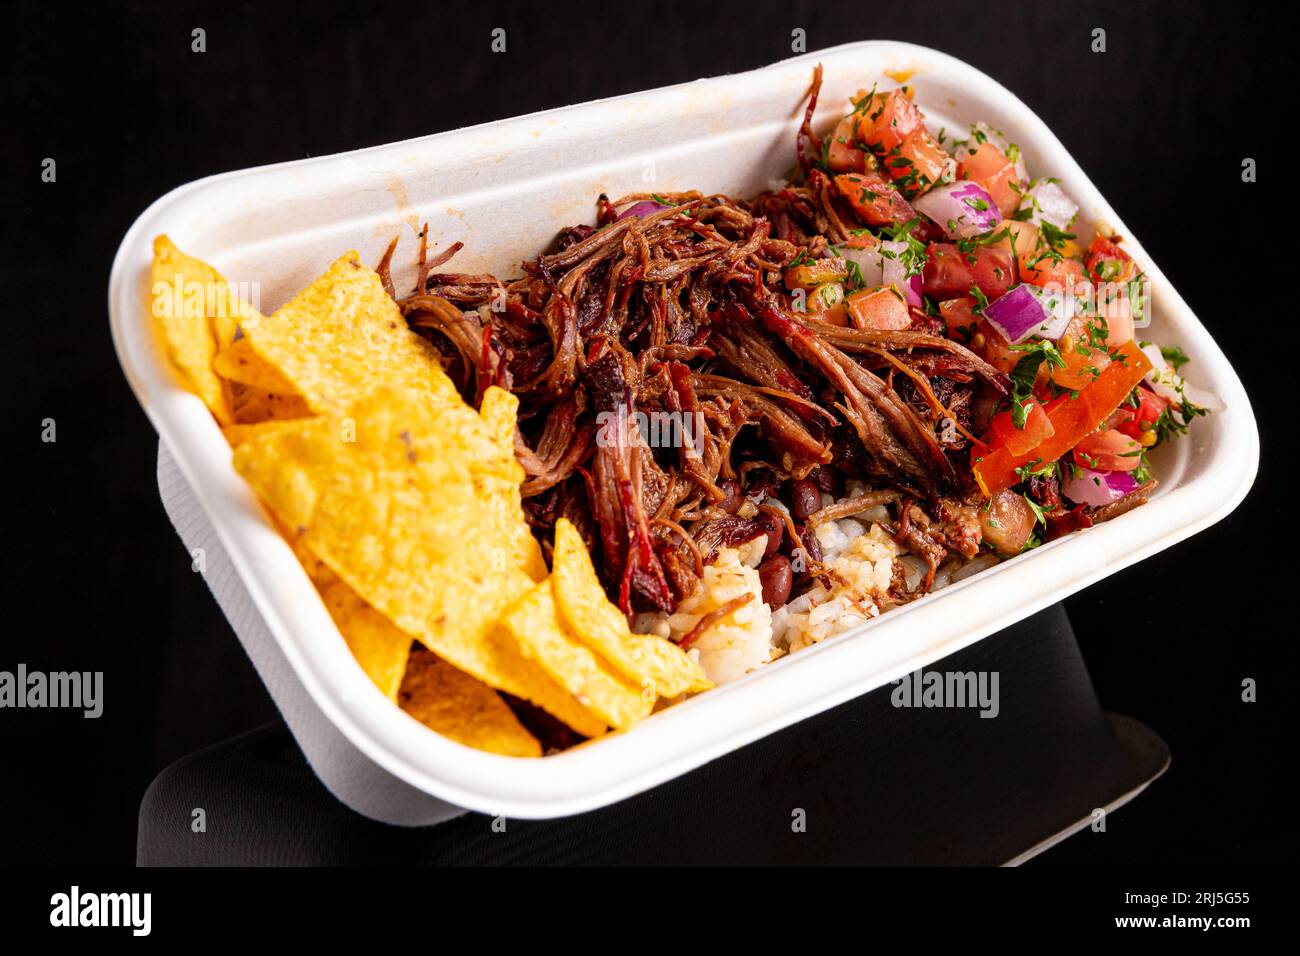 A closeup image of a plate with pulled beef, steamed white rice, and a side of salsa Stock Photo